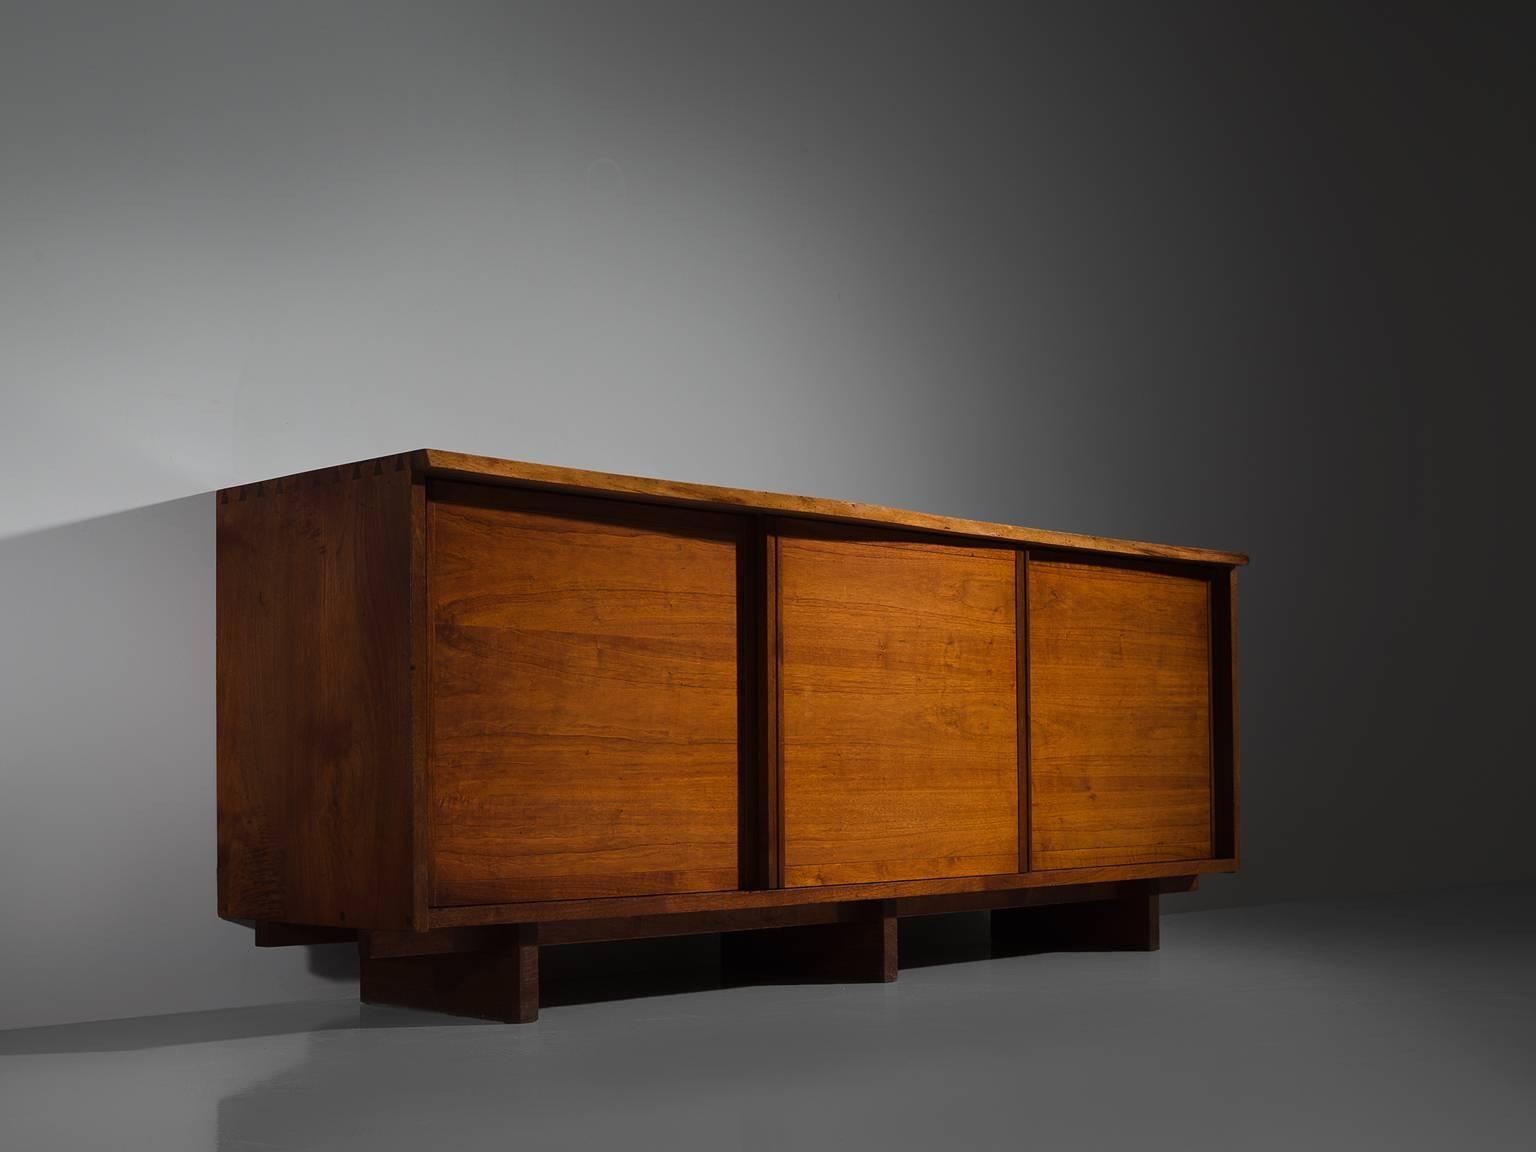 George Nakashima, triple sliding door cabinet, walnut, New Hope, PA, 1960s

Cabinet with three sliding doors and four drawers behind each door, executed in walnut with traditional and archetypical dovetail Nakashima wood-joints. The credenza is part